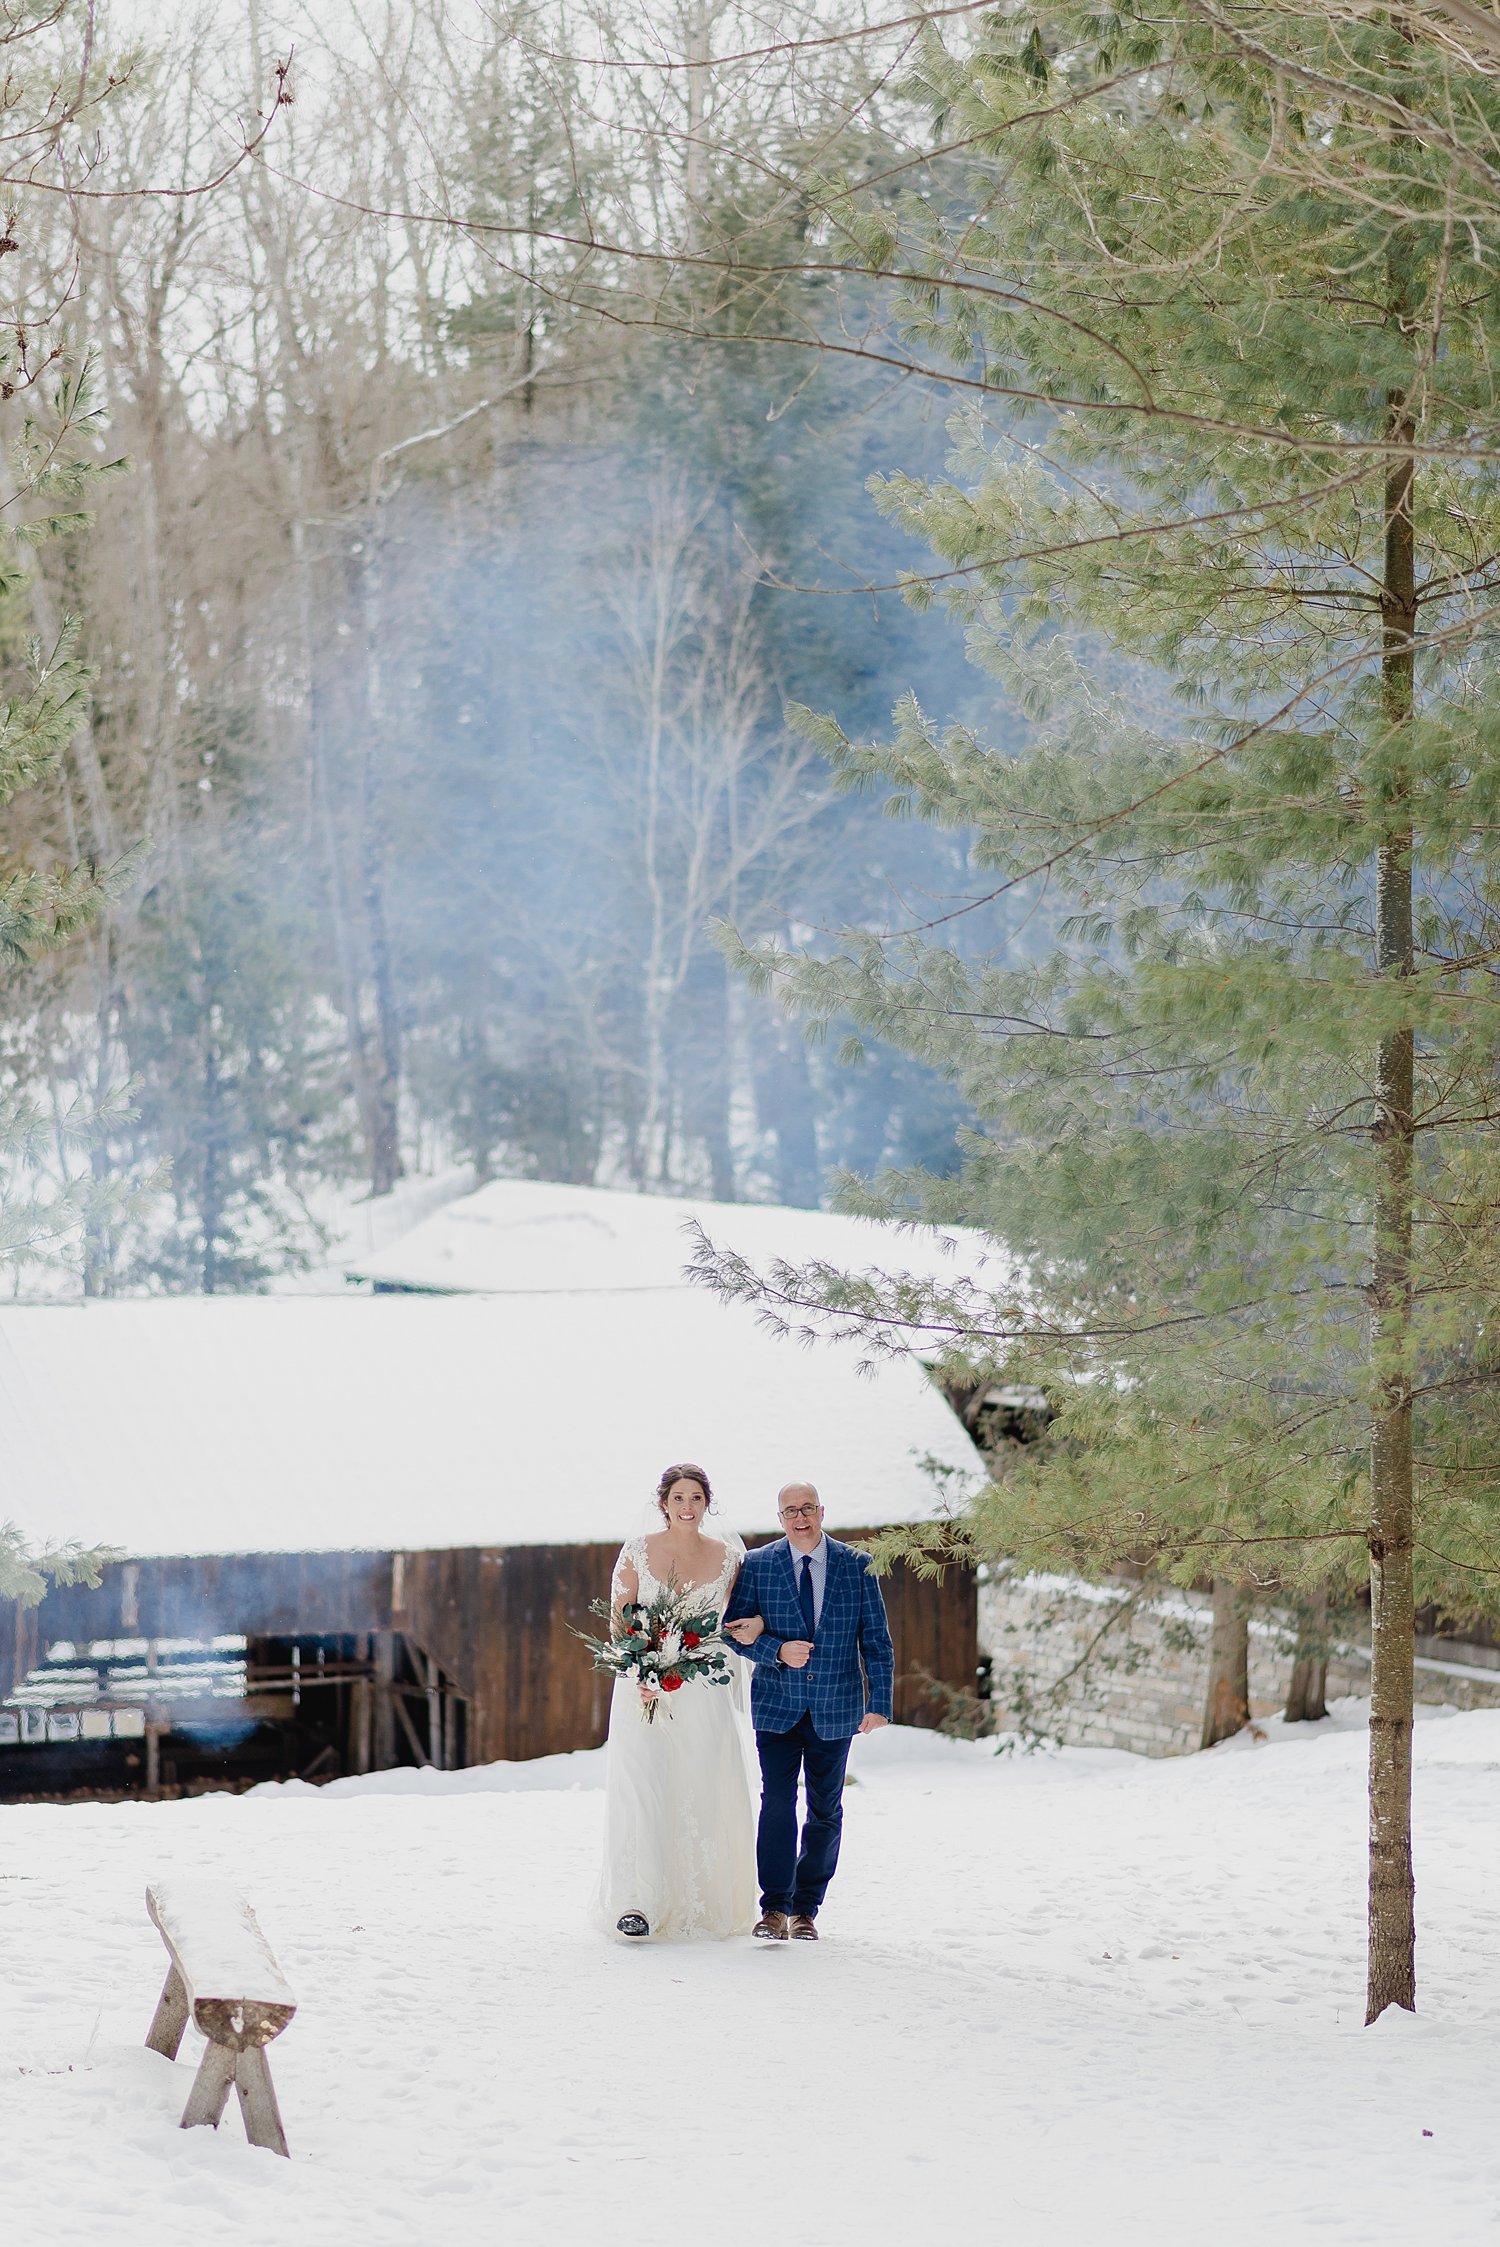 Intimate Winter Elopement at O'Hara Mill Homestead in Madoc, Ontario | Prince Edward County Wedding Photographer | Holly McMurter Photographs_0009.jpg